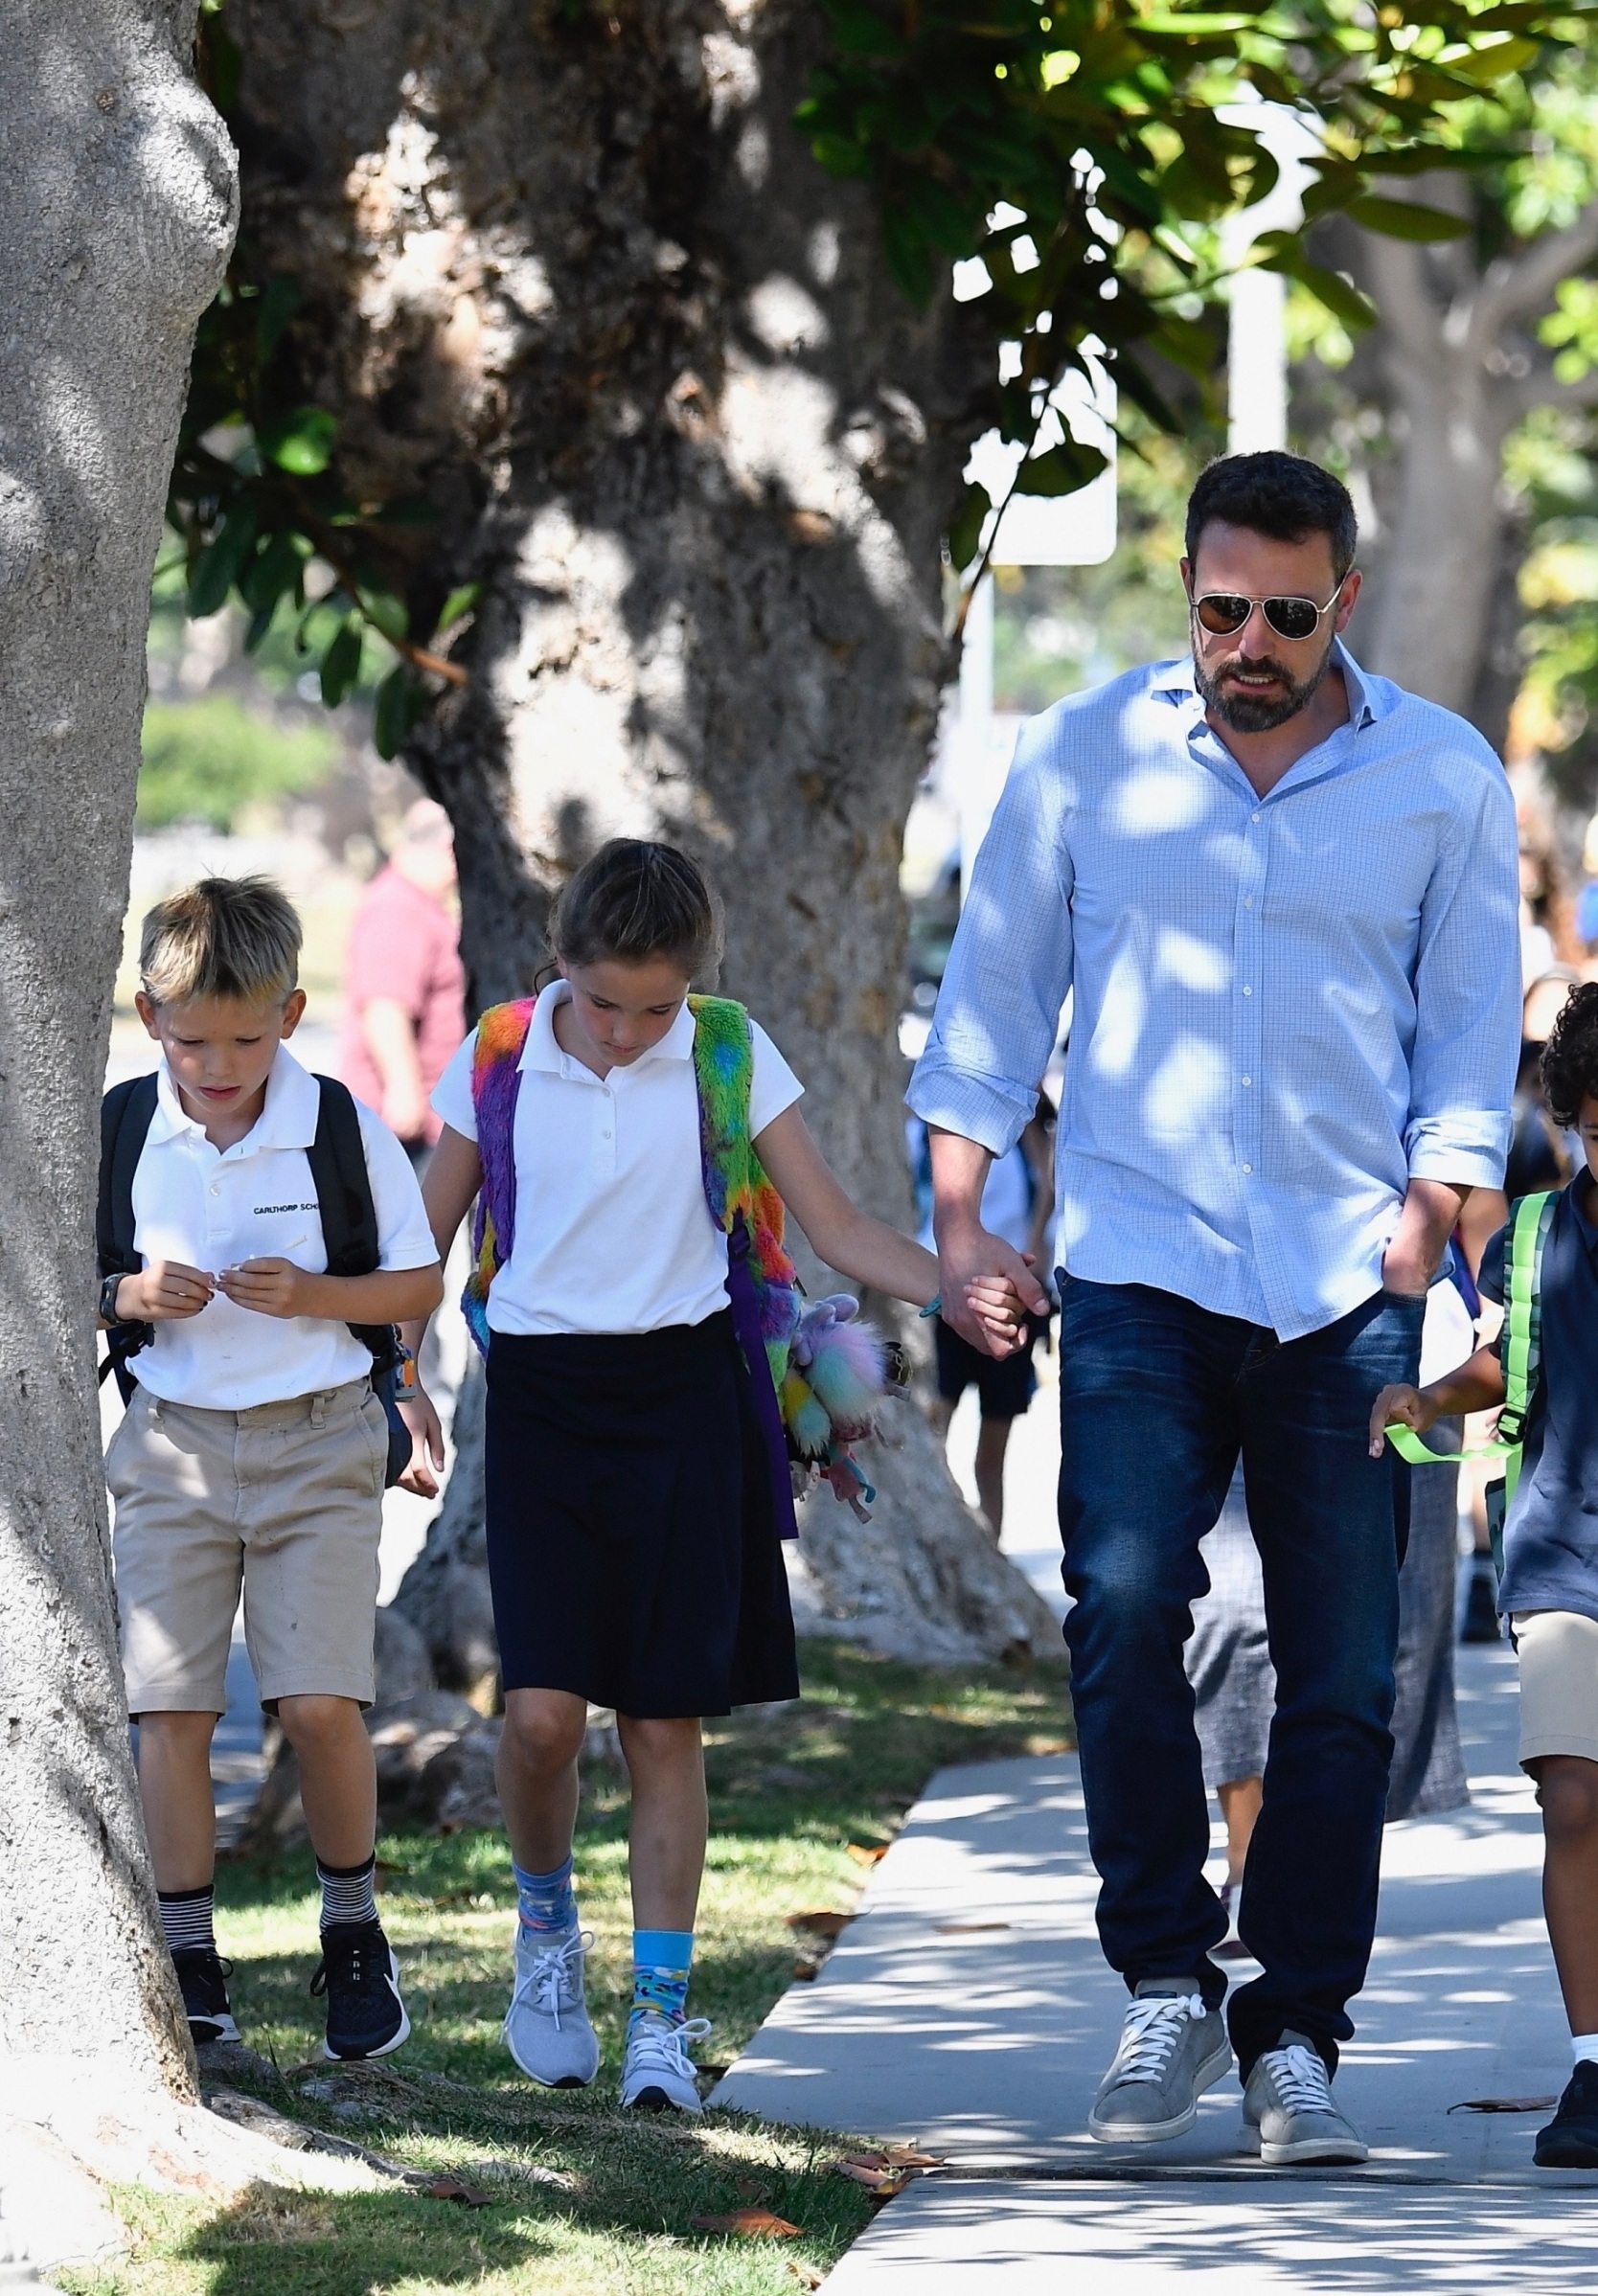 Brentwood, CA  - Ben Affleck is on dad duties as he is seen walking to his kid's school to pick them up on Friday afternoon.

BACKGRID USA 13 SEPTEMBER 2019, Image: 470758864, License: Rights-managed, Restrictions: , Model Release: no, Credit line: Boaz / BACKGRID / Backgrid USA / Profimedia